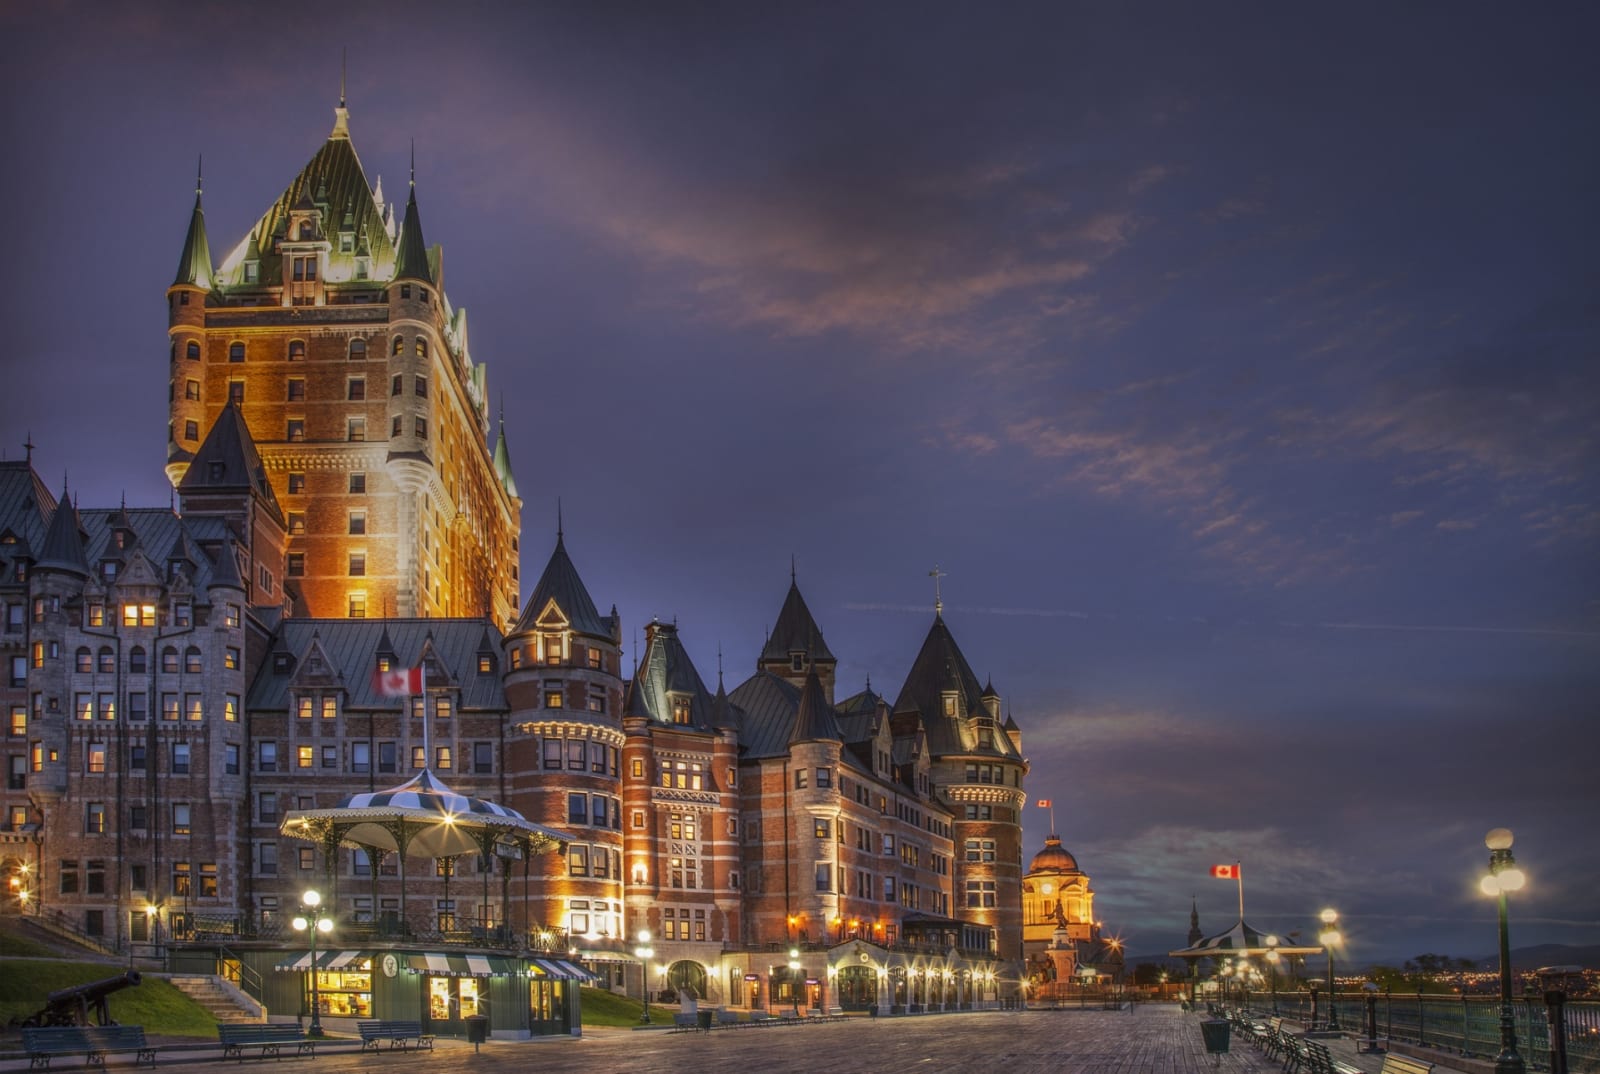 Chateau Frontenac Hotel in Quebec Canada